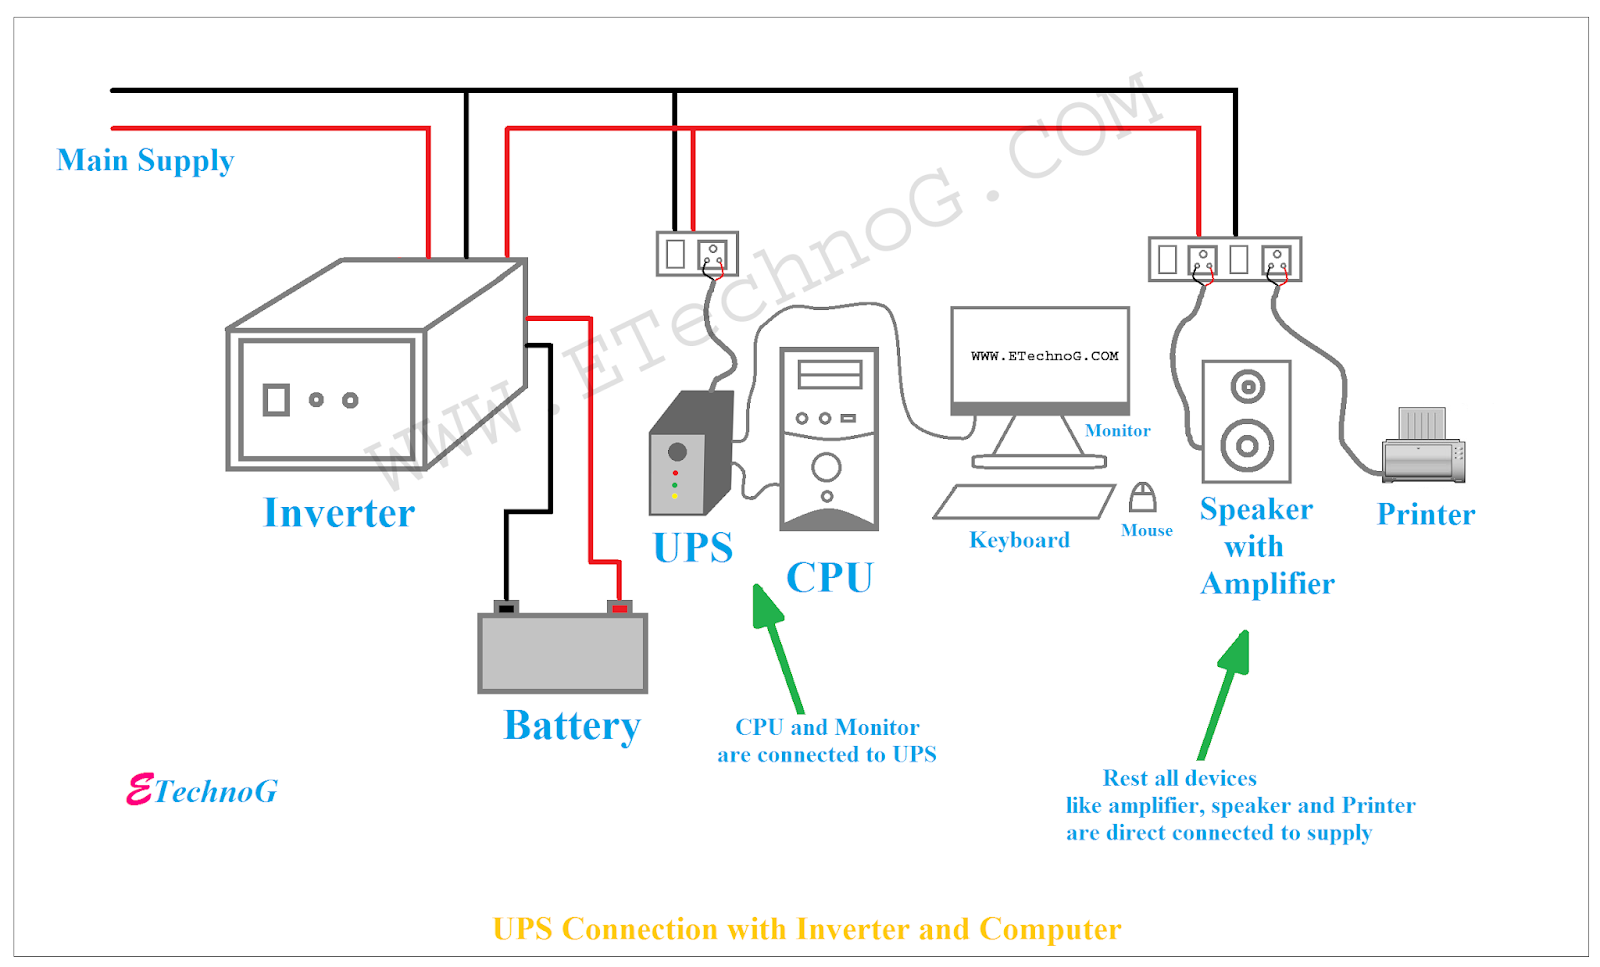 Proper Ups Connection With Loads Inverter Computer At Home Etechnog